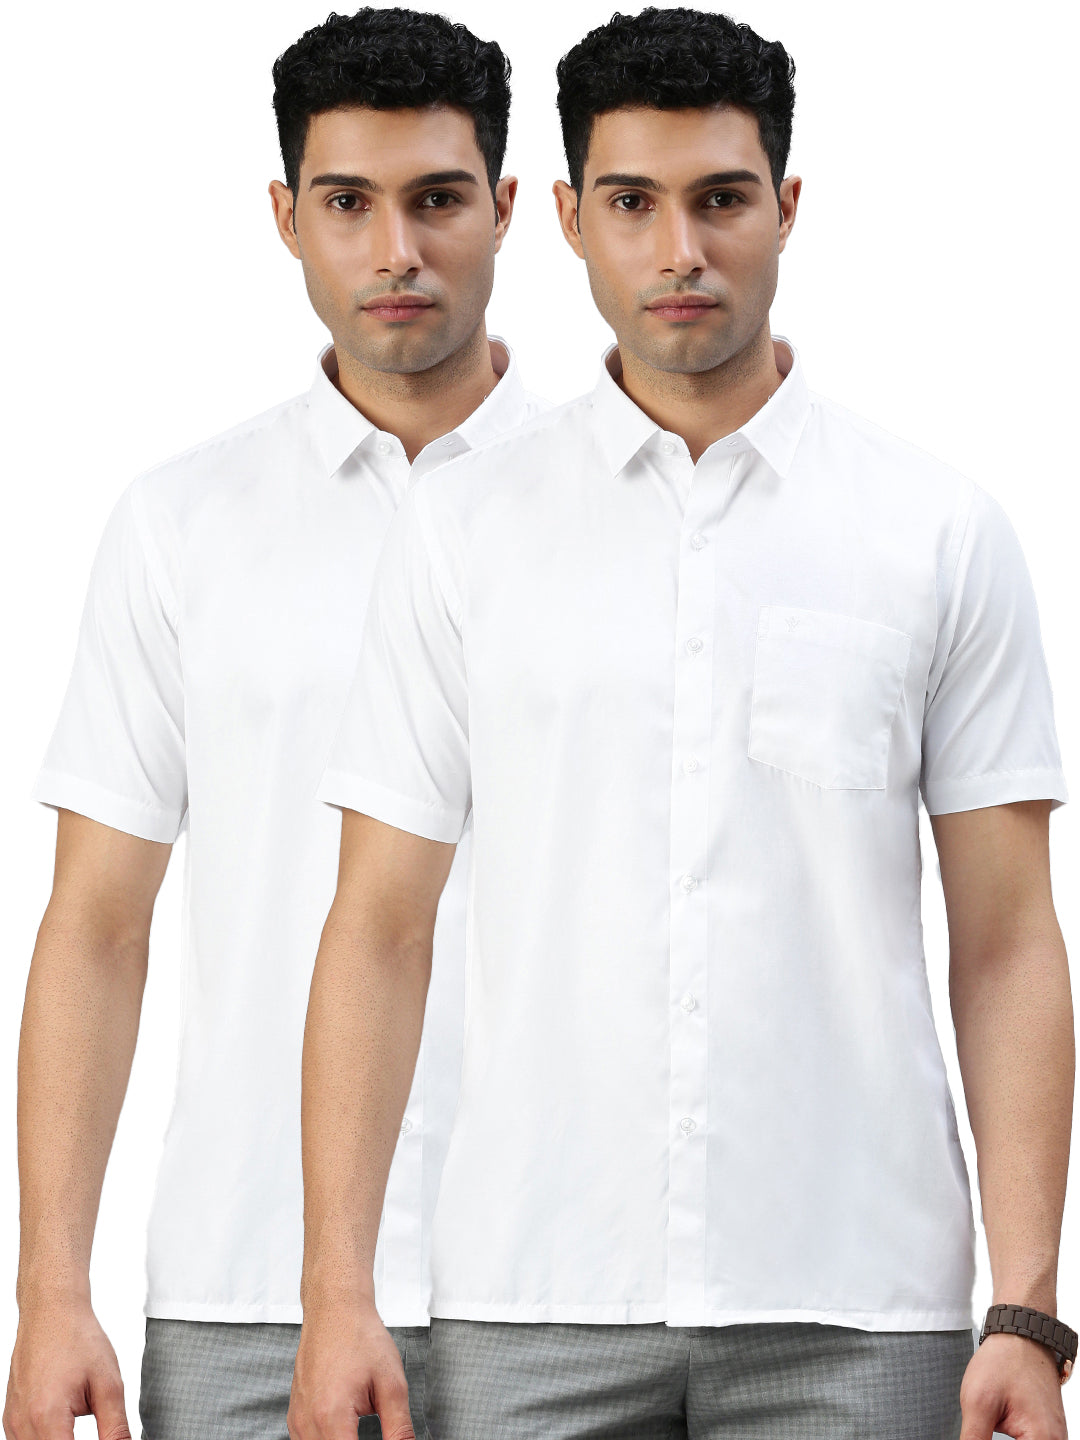 Mens Cotton White Shirt Half Sleeves Wewin New (2 Pcs Pack)